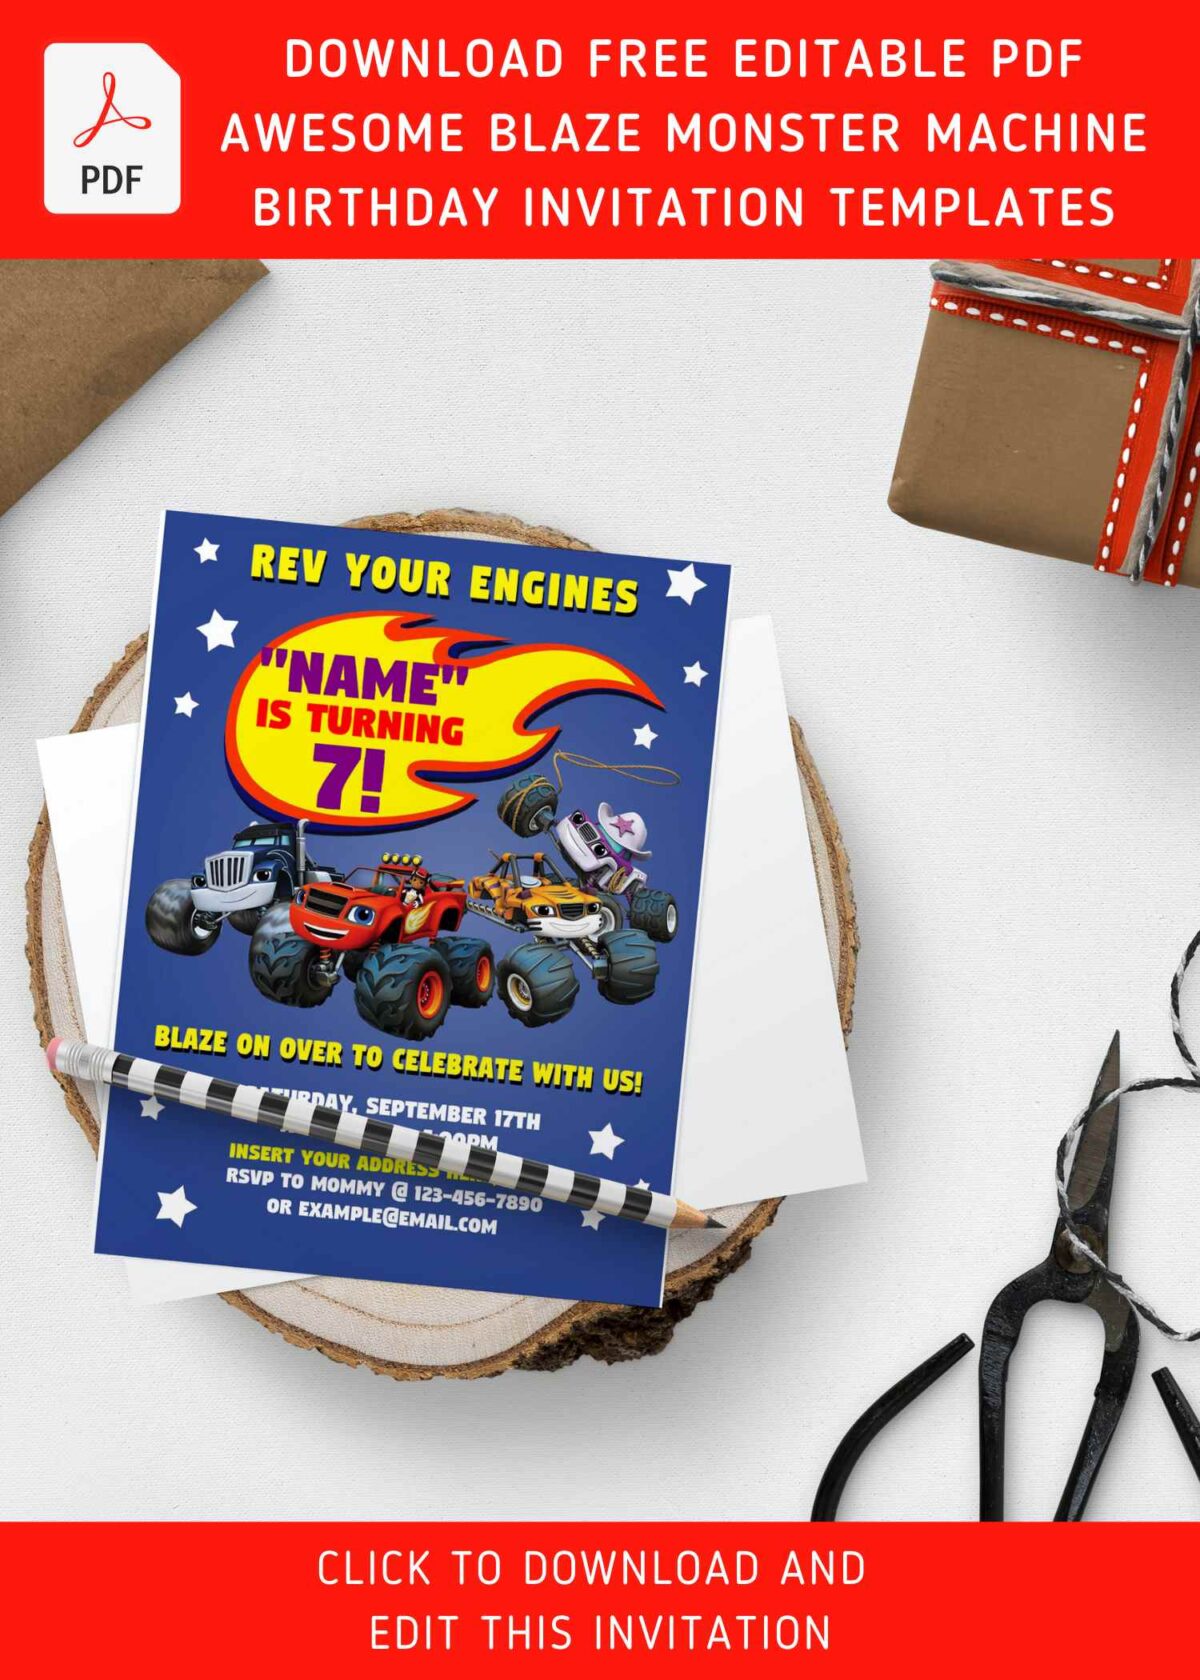 (Free Editable PDF) Epic Blazing Blaze And The Monster Machine Birthday Invitation Templates with starla the cowboy truck